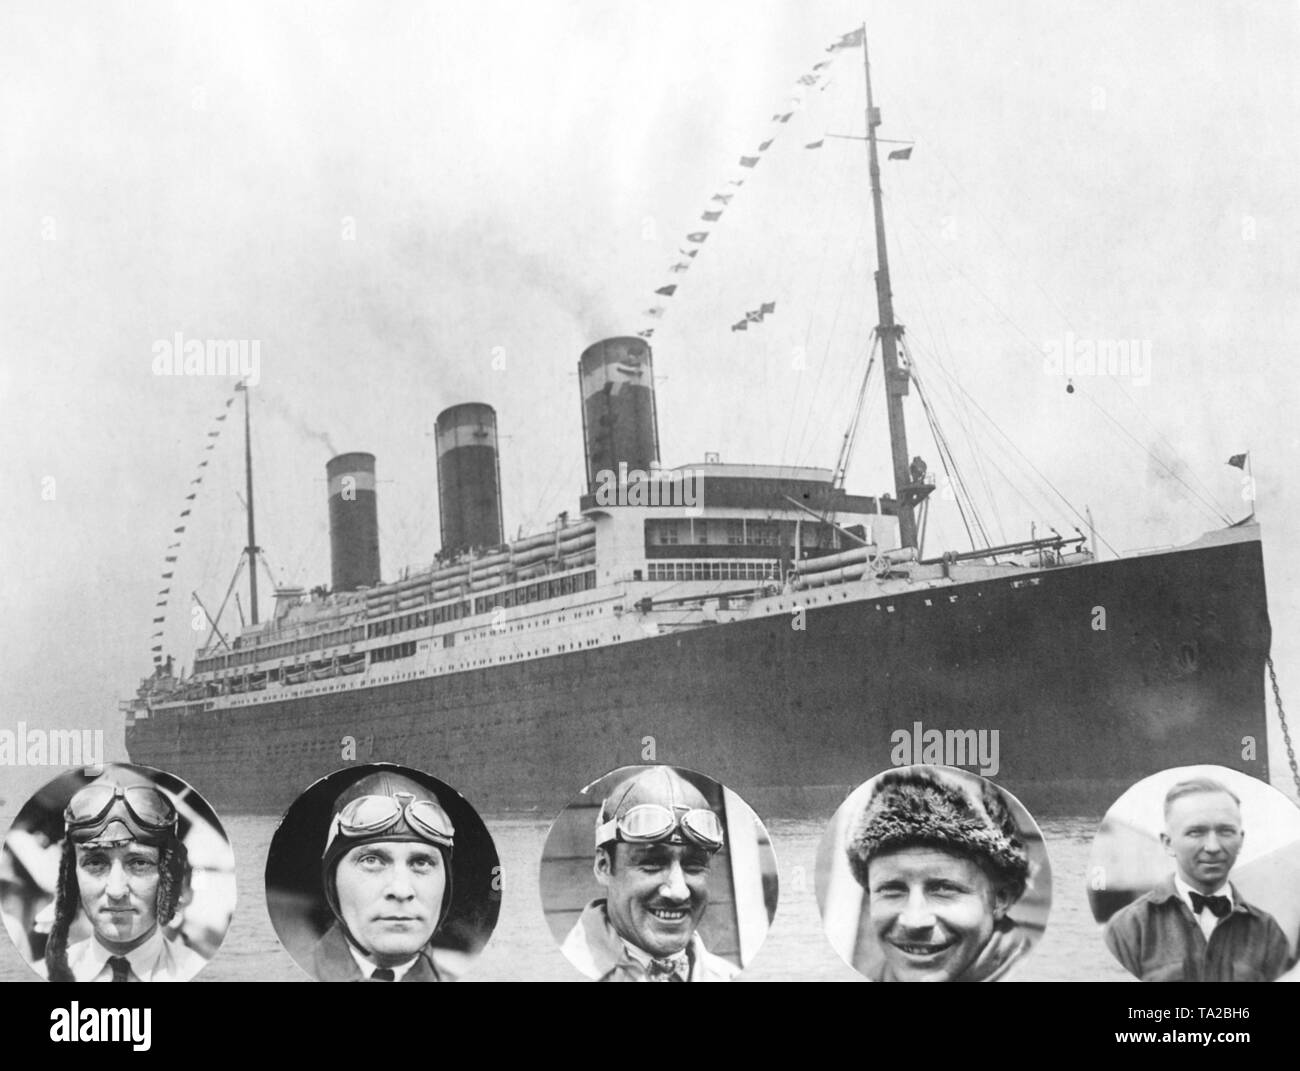 In 1927 the American ocean liner 'Leviathan' brought five American aviation pioneers back to the United States. From left: Commander Richard Evelyn Byrd, Lieutenant George O. Noville, Bert Acosta, Bert Balchen and Clarence D.Chamberlin. Stock Photo